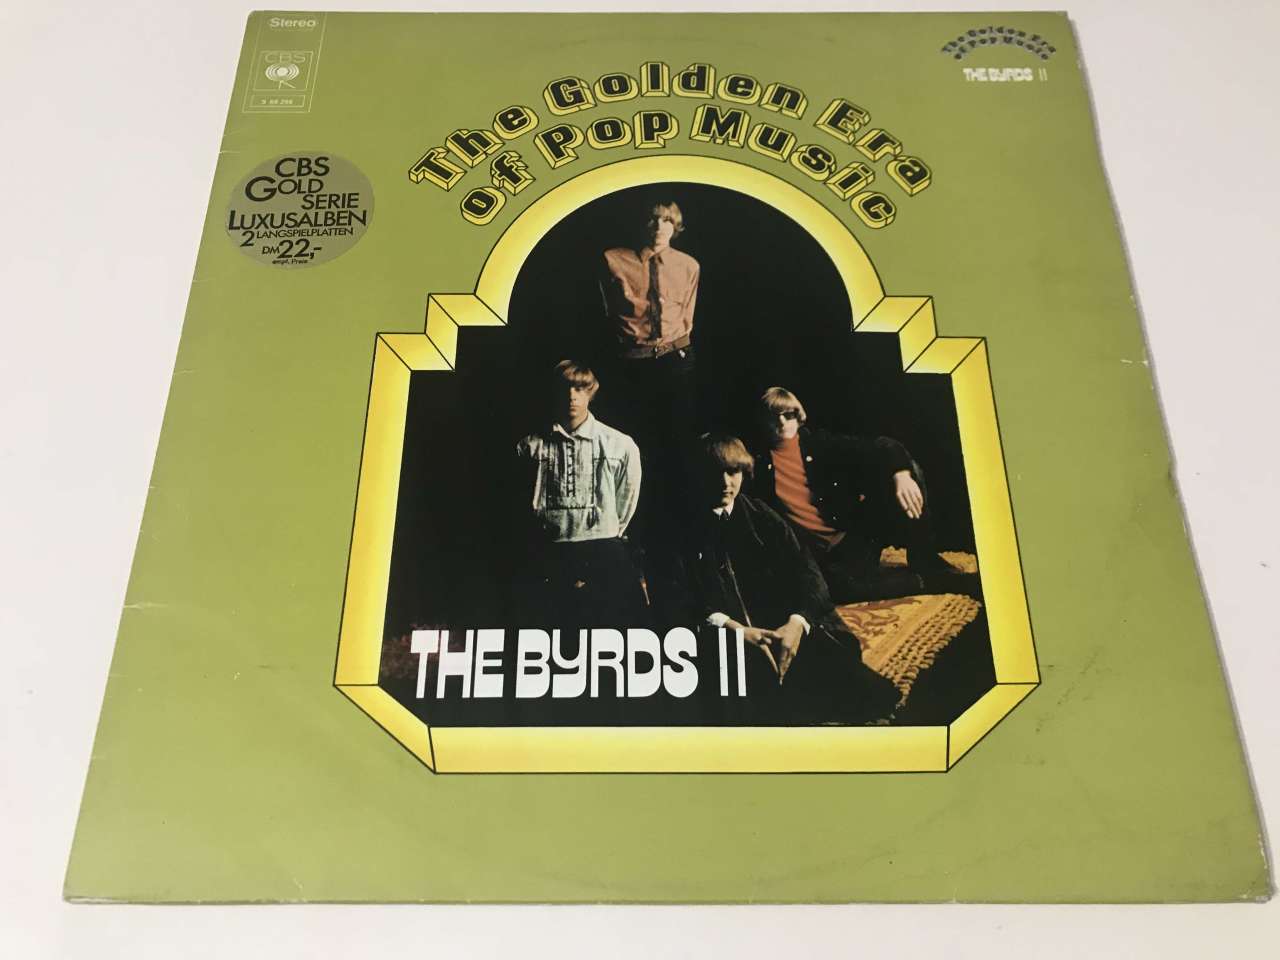 The Byrds – The Golden Era Of Pop Music - The Byrds II 2 LP